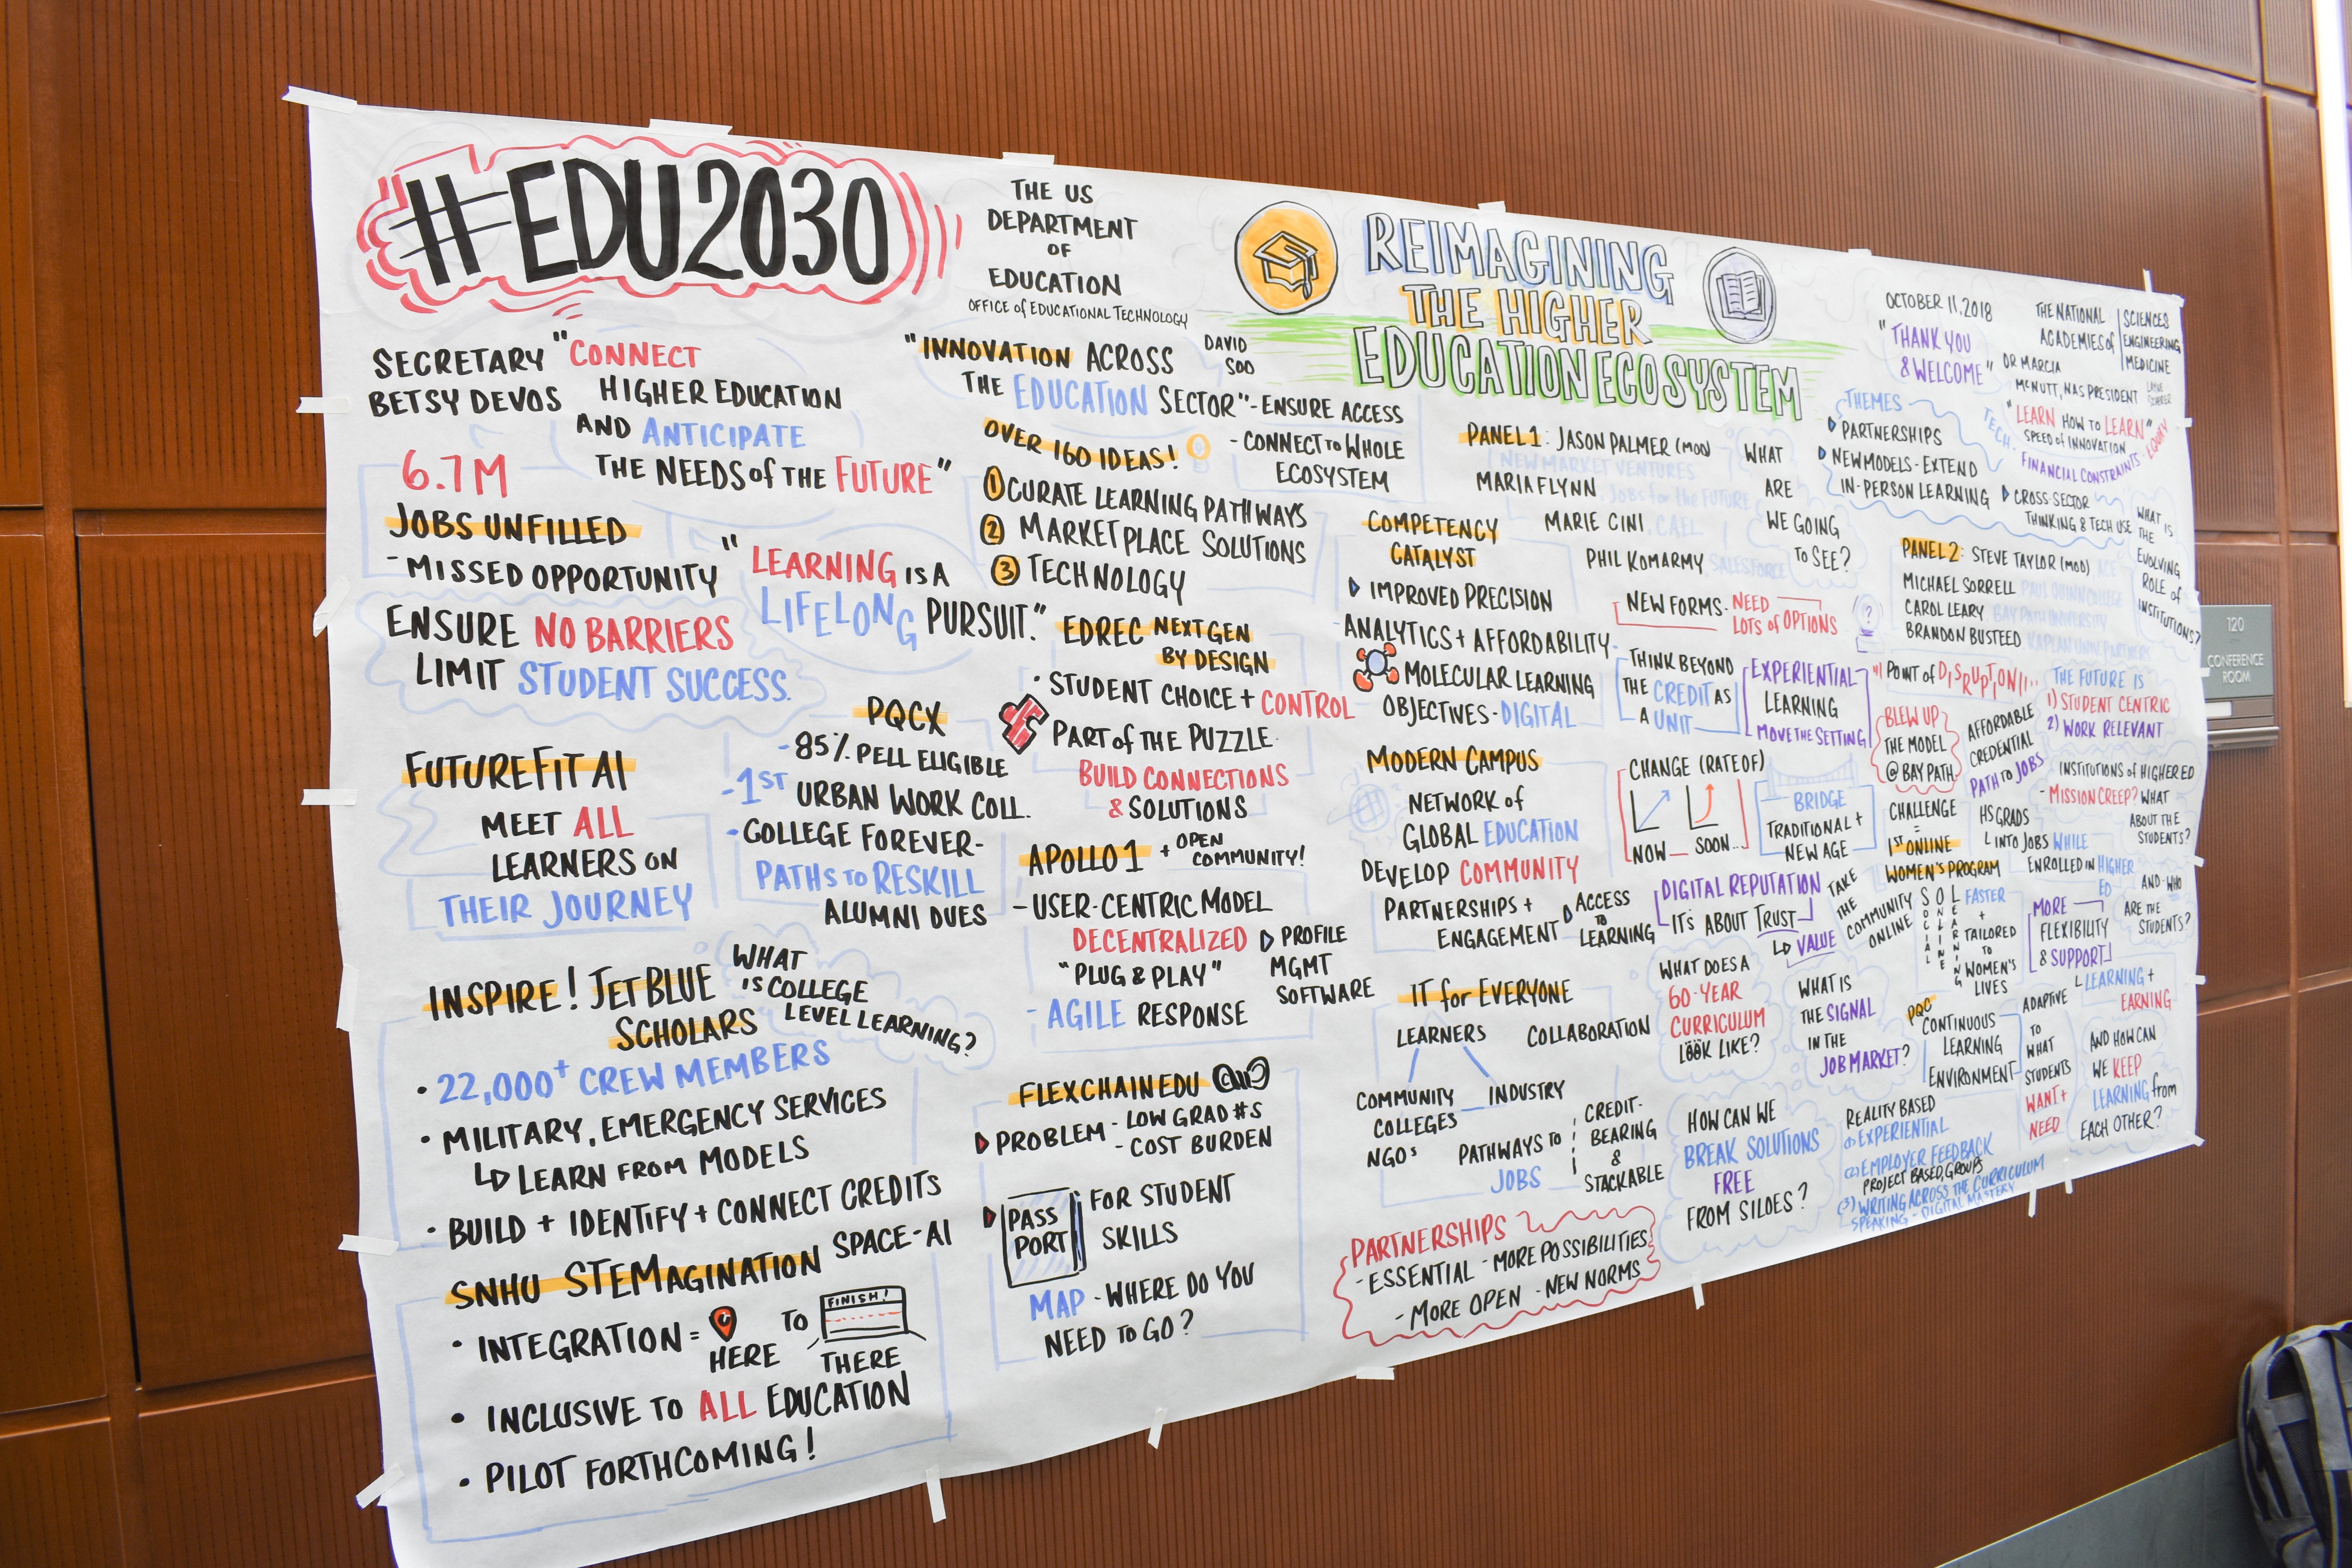 This poster, constructed during last Thursday's event, contains notes from all of the presentations and panels.